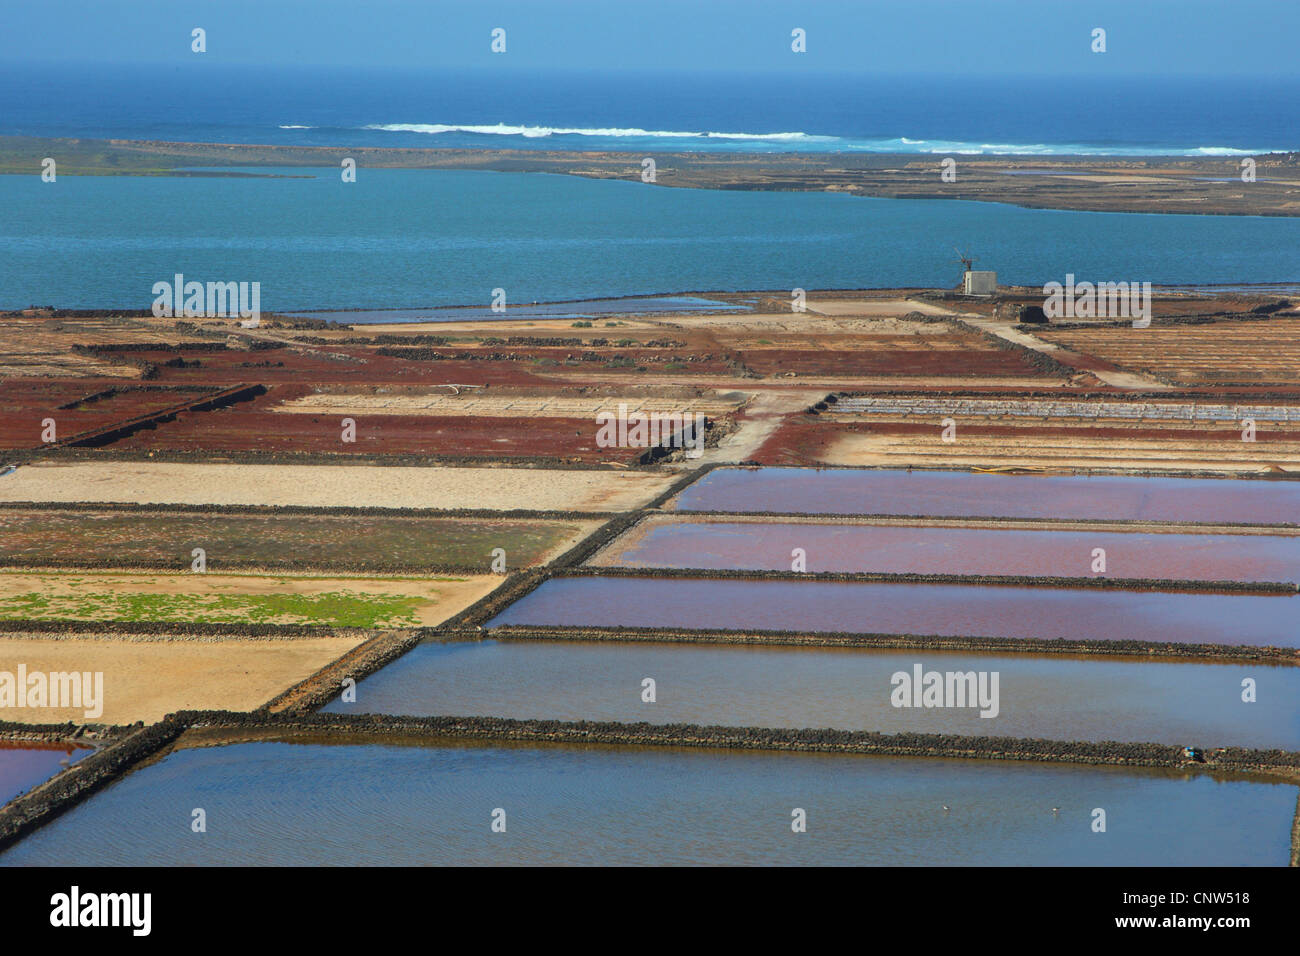 Salt-works at the west coast of Lanzarote, Canary Islands, Lanzarote Stock Photo